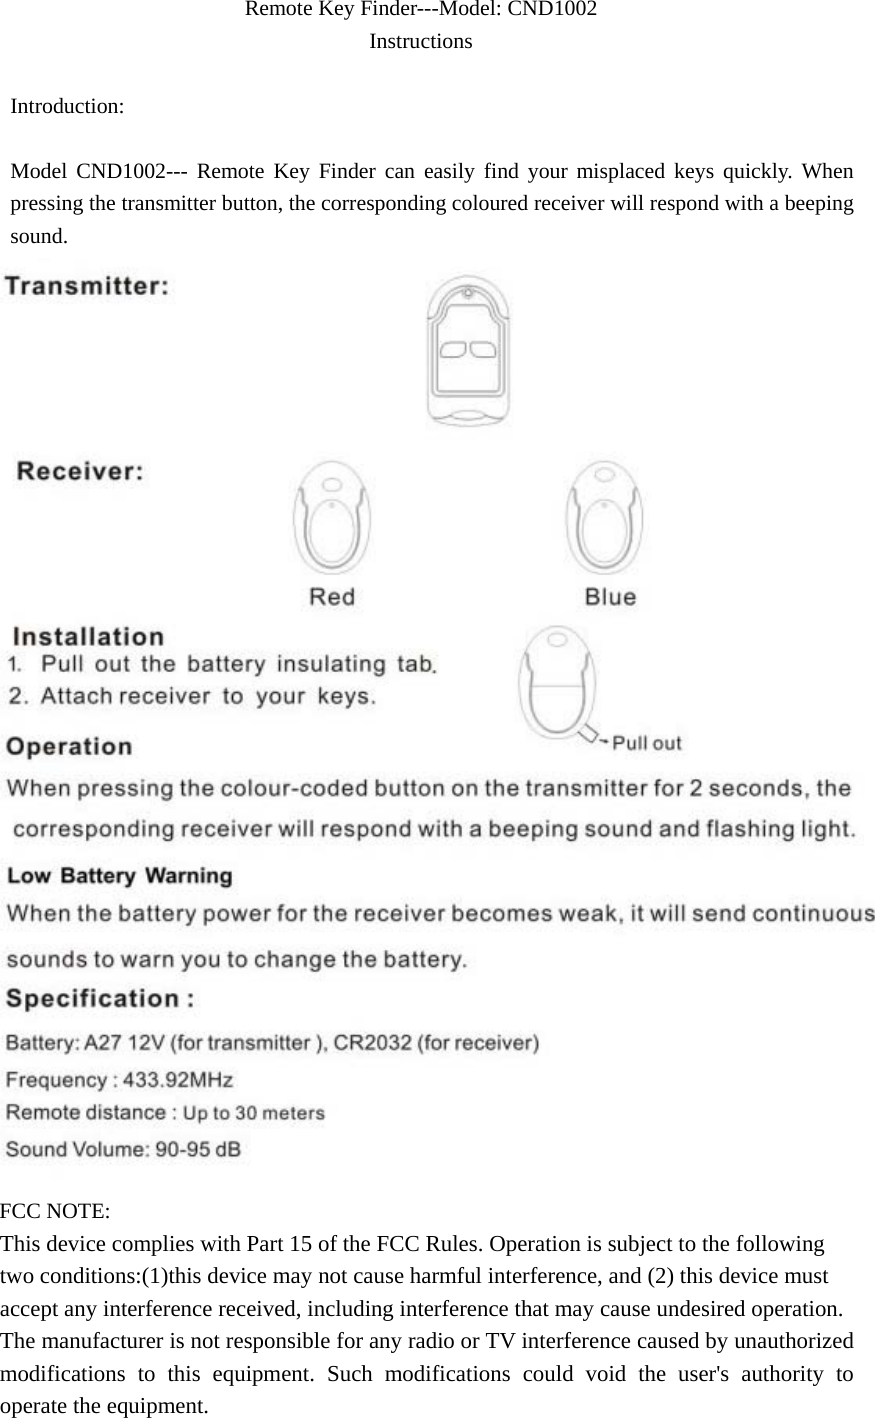 Remote Key Finder---Model: CND1002 Instructions                          Introduction:  Model CND1002--- Remote Key Finder can easily find your misplaced keys quickly. When pressing the transmitter button, the corresponding coloured receiver will respond with a beeping sound.  FCC NOTE: This device complies with Part 15 of the FCC Rules. Operation is subject to the following two conditions:(1)this device may not cause harmful interference, and (2) this device must accept any interference received, including interference that may cause undesired operation. The manufacturer is not responsible for any radio or TV interference caused by unauthorized modifications to this equipment. Such modifications could void the user&apos;s authority to operate the equipment. 